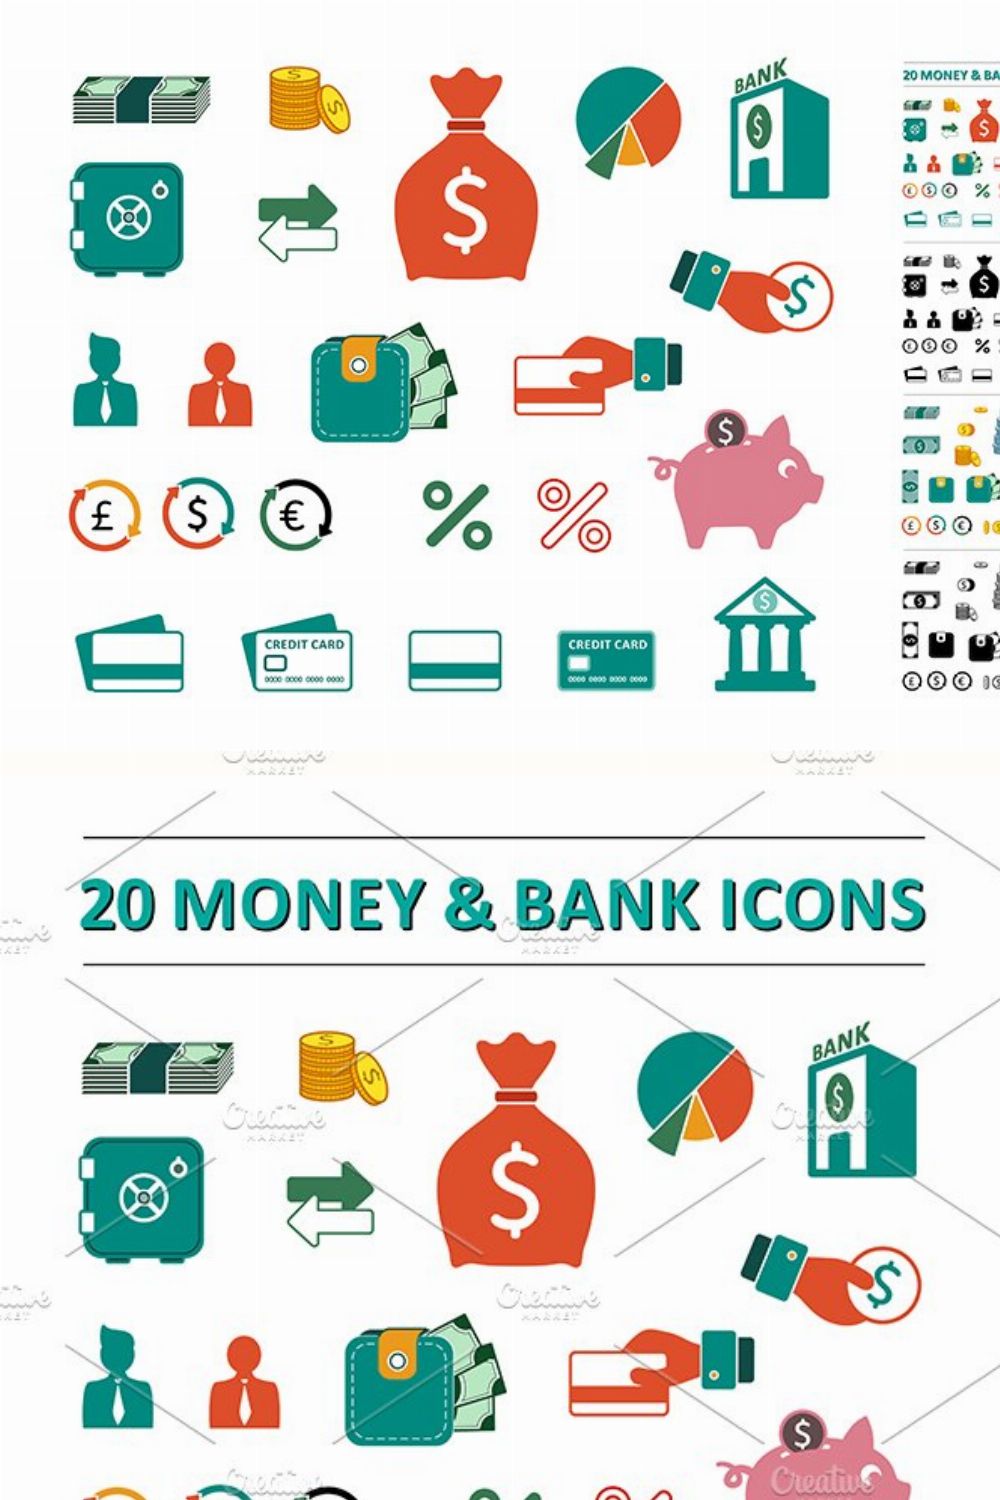 Money & bank icons pinterest preview image.